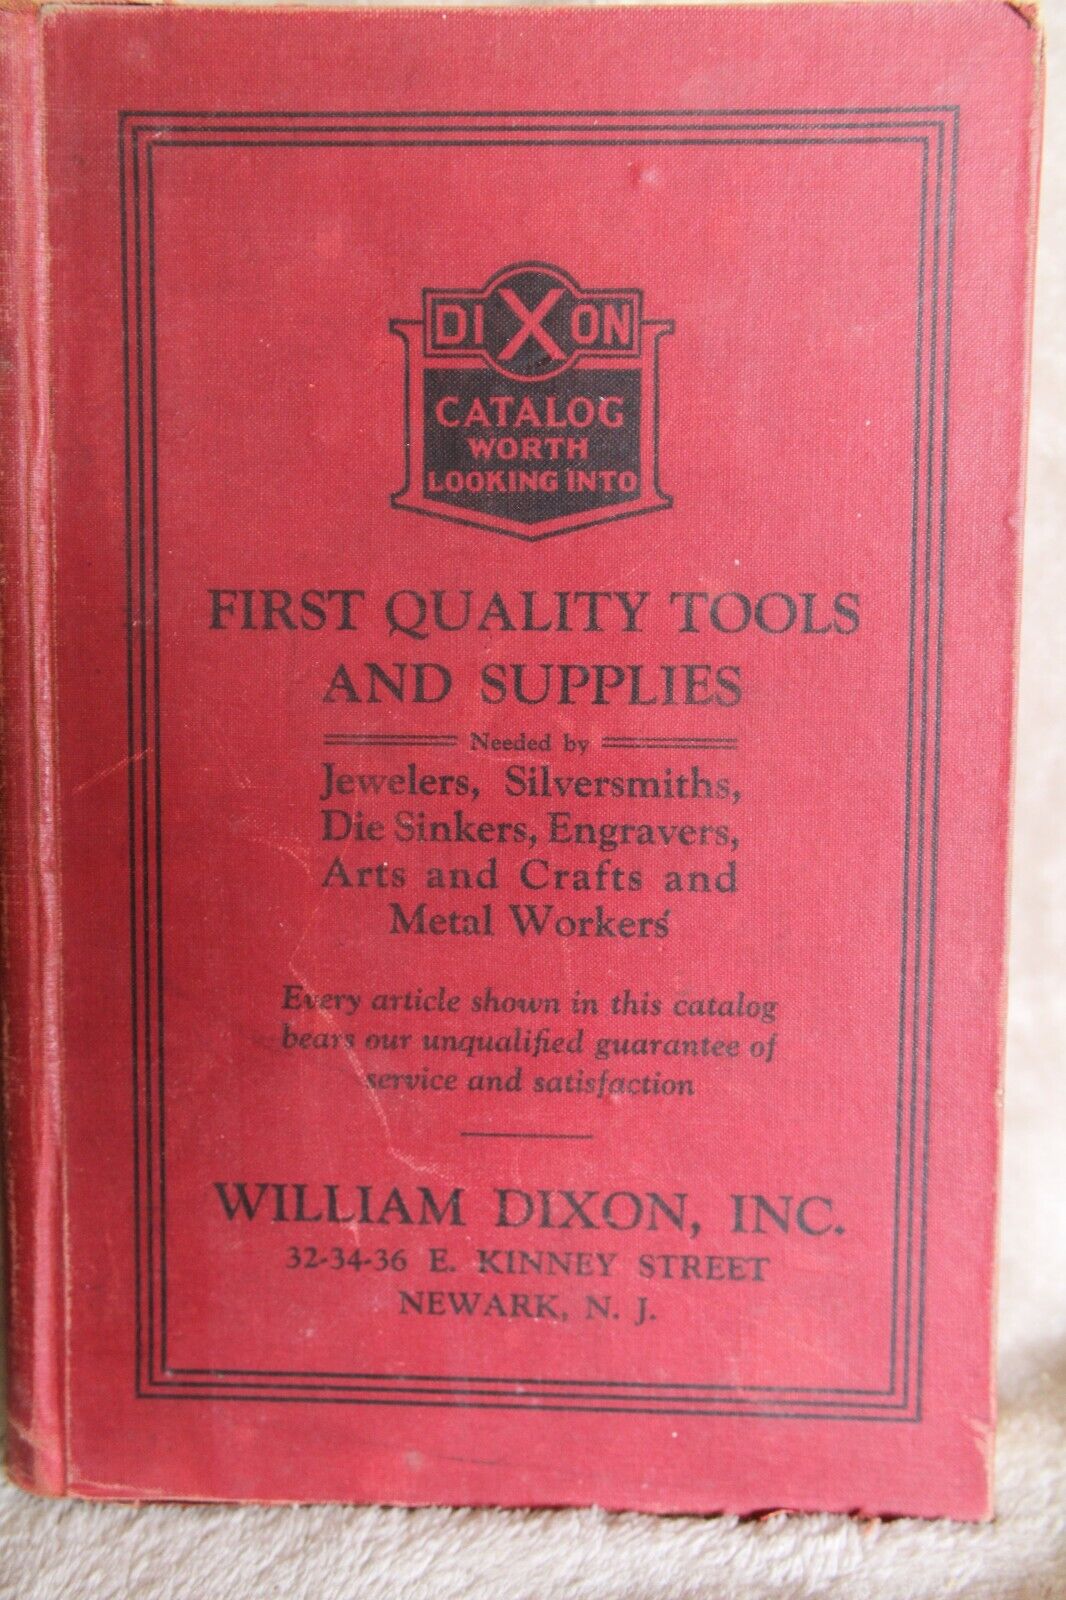 Vintage 1926 William Dixon First Quality Tools & Supplies Catalog Hardcover N.J.